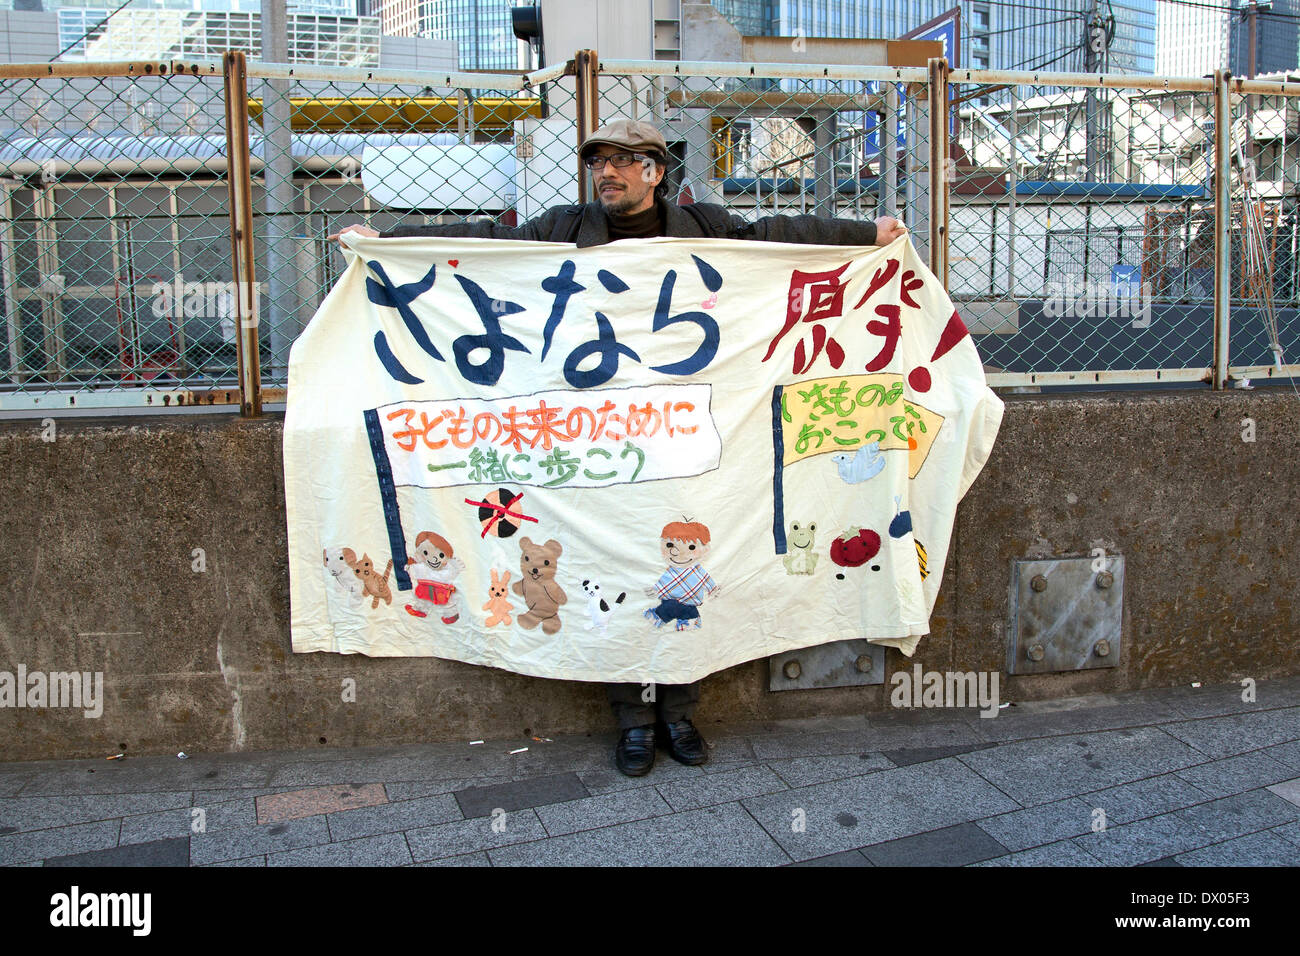 Tokyo Japan Anti Nukes Demonstrator Holds A Placard During Sayonara Genpatsu Rally At The Central Tokyo On March 15 14 The Nobel Prize Winner In Literature A Japanese Author Kenzaburo Oe Leads